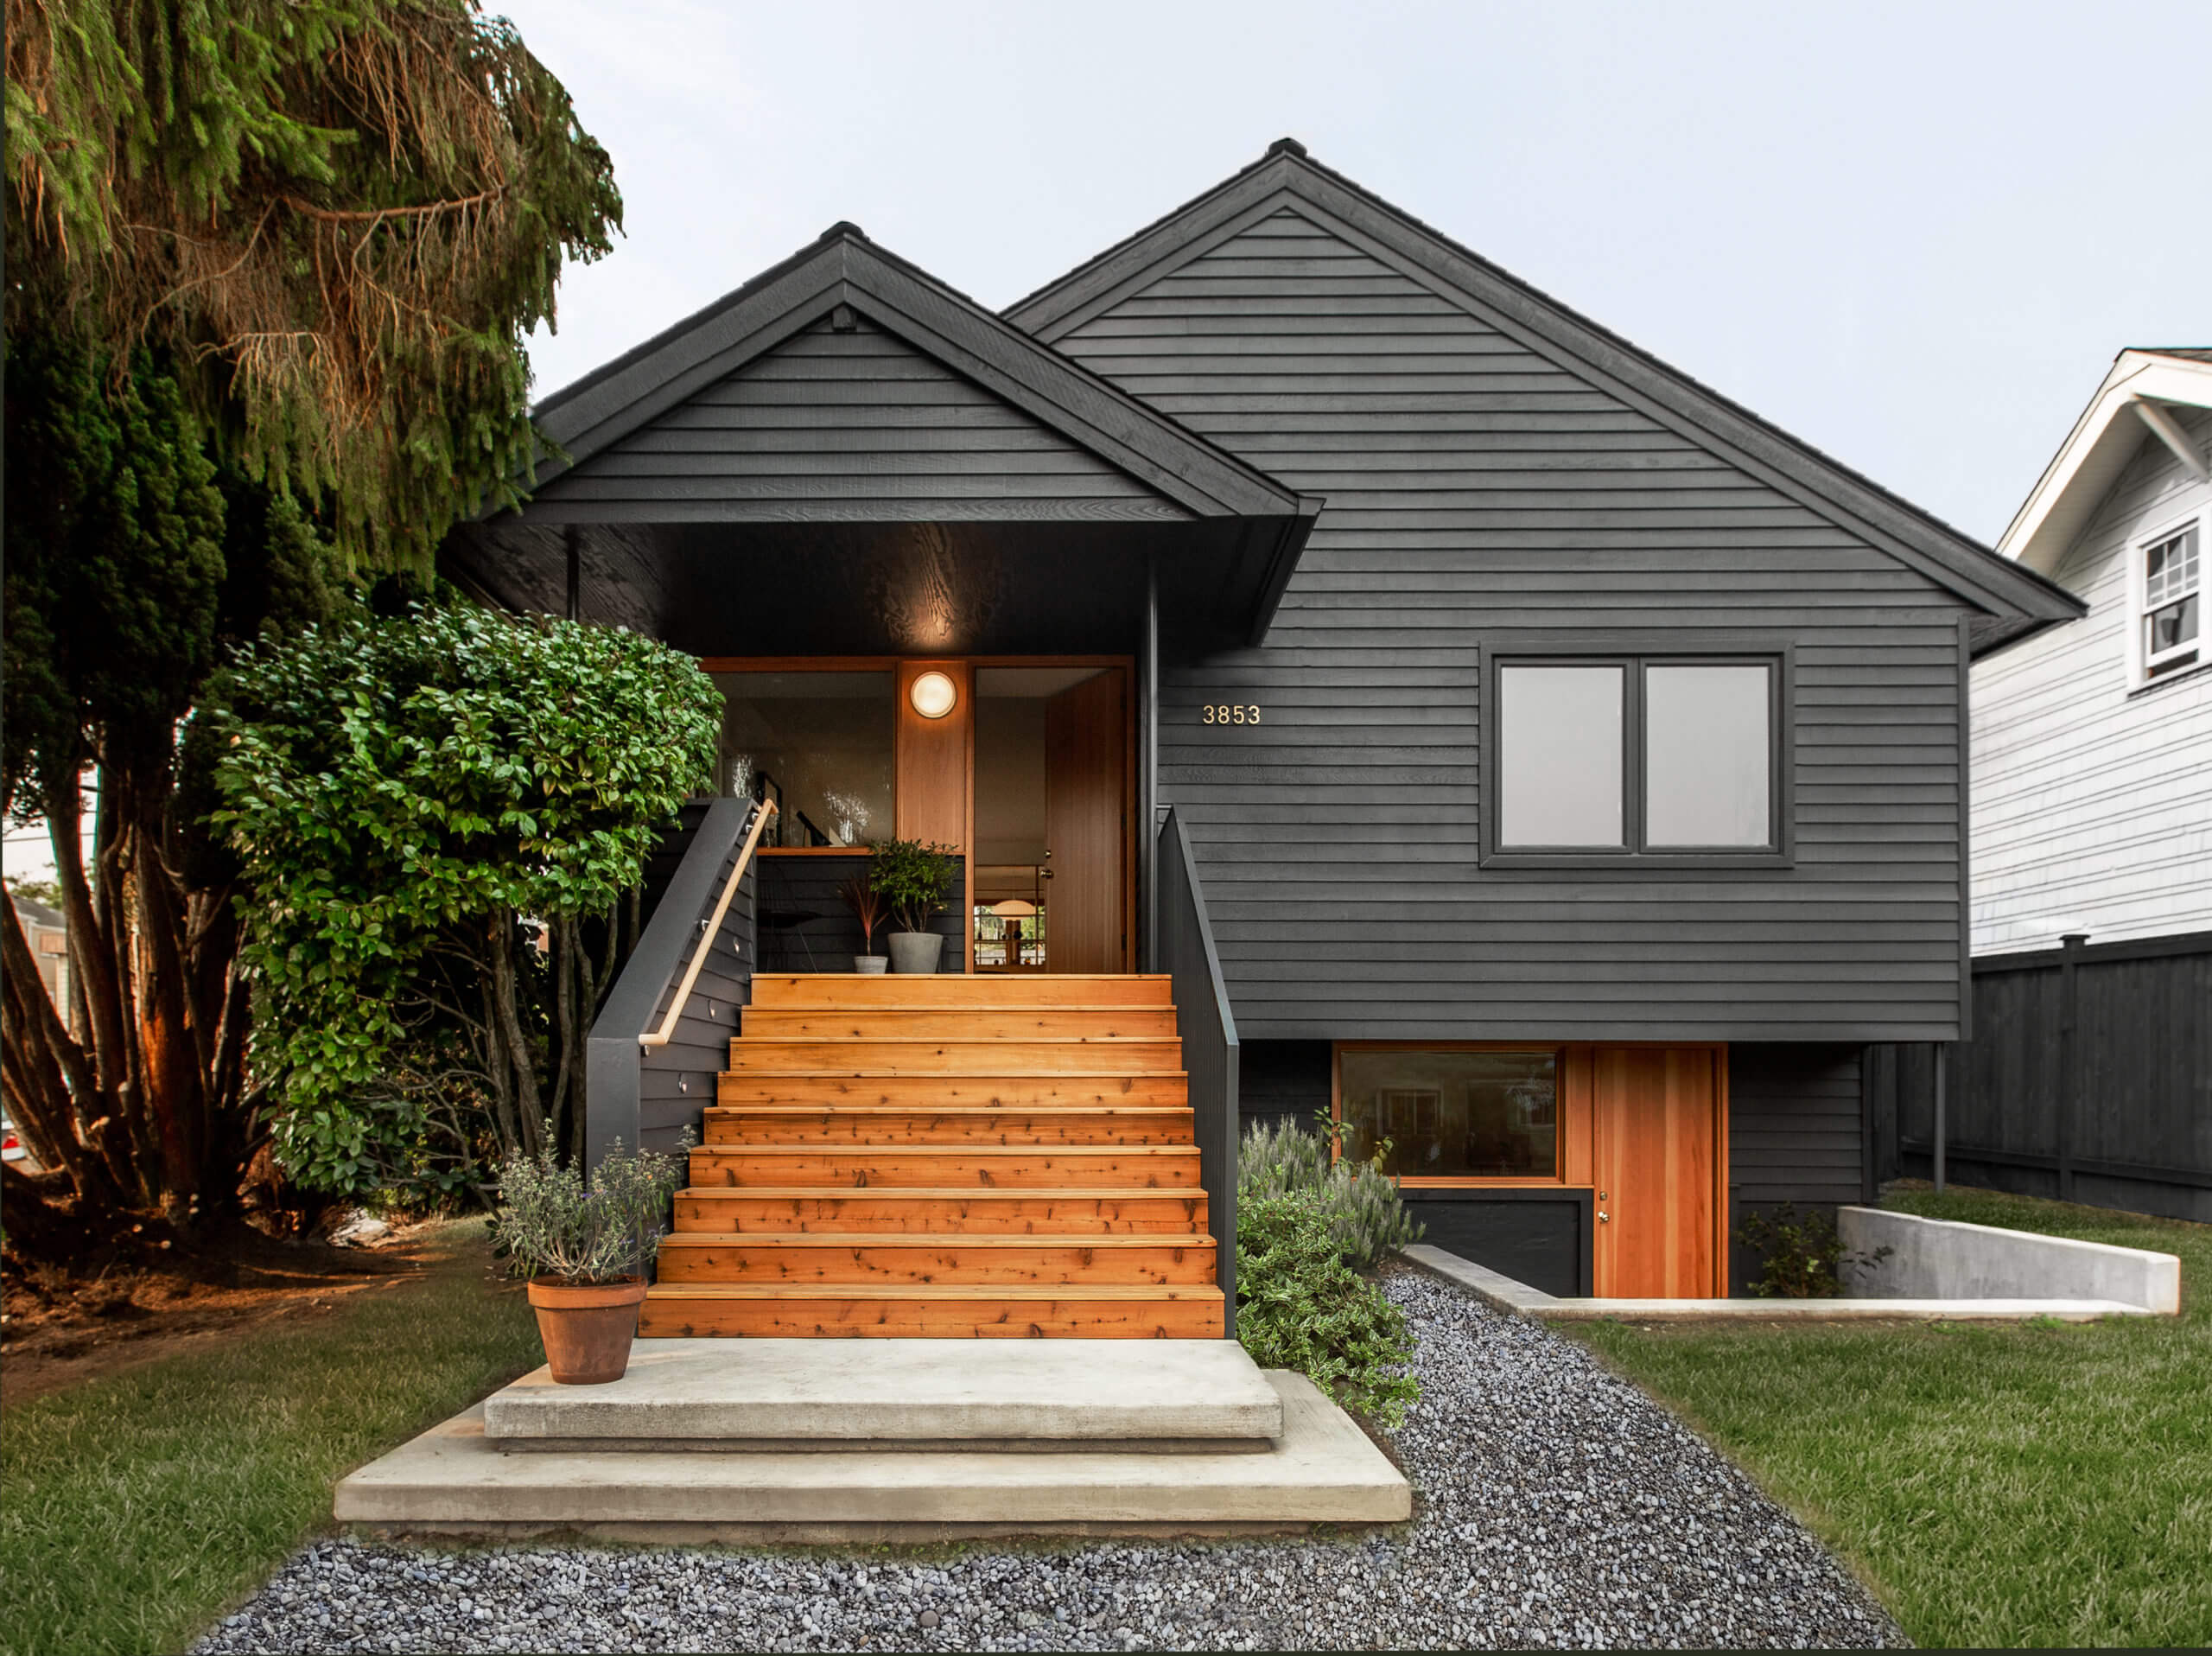 Photo of a house painted black with new wood stairs